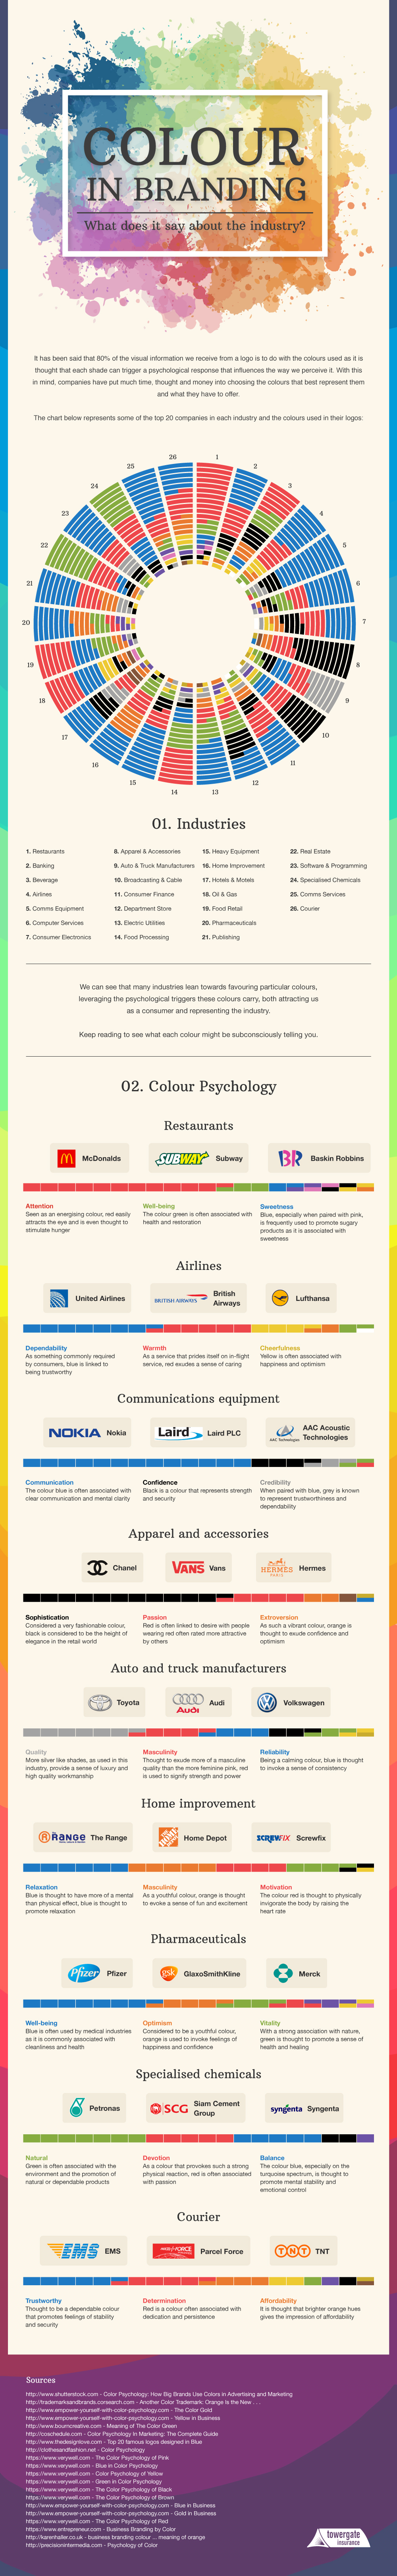 Colour In Branding [Infographic]